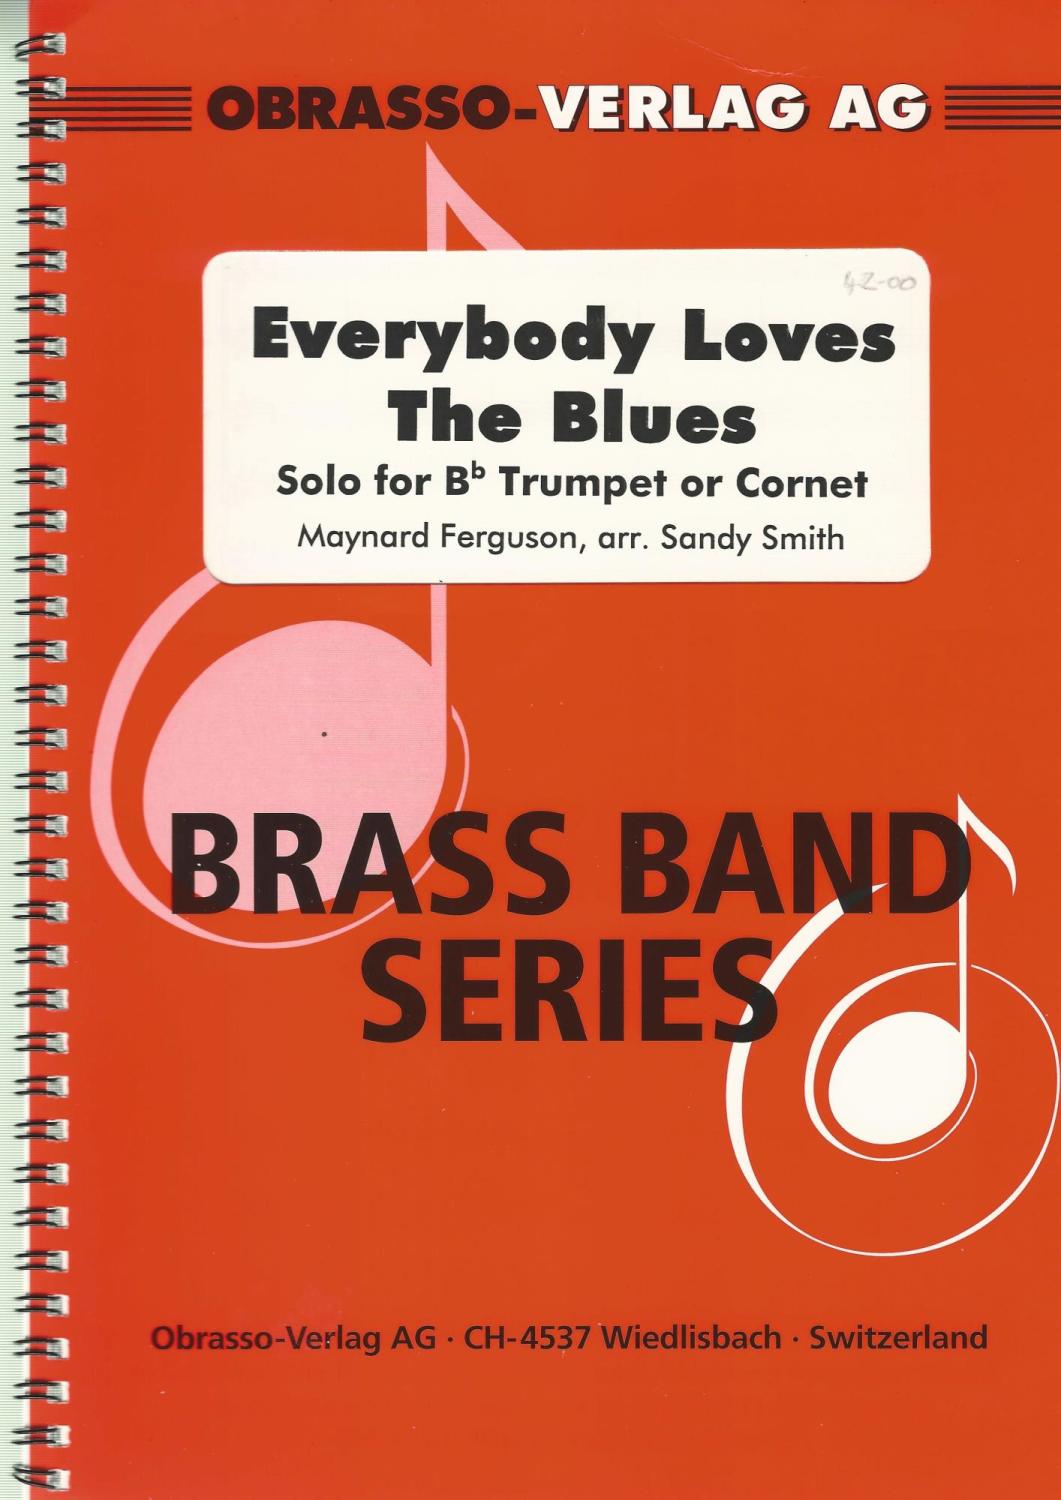 Everybody Loves The Blues - Solo for Bb Trumpet or Cornet and Brass Band - 